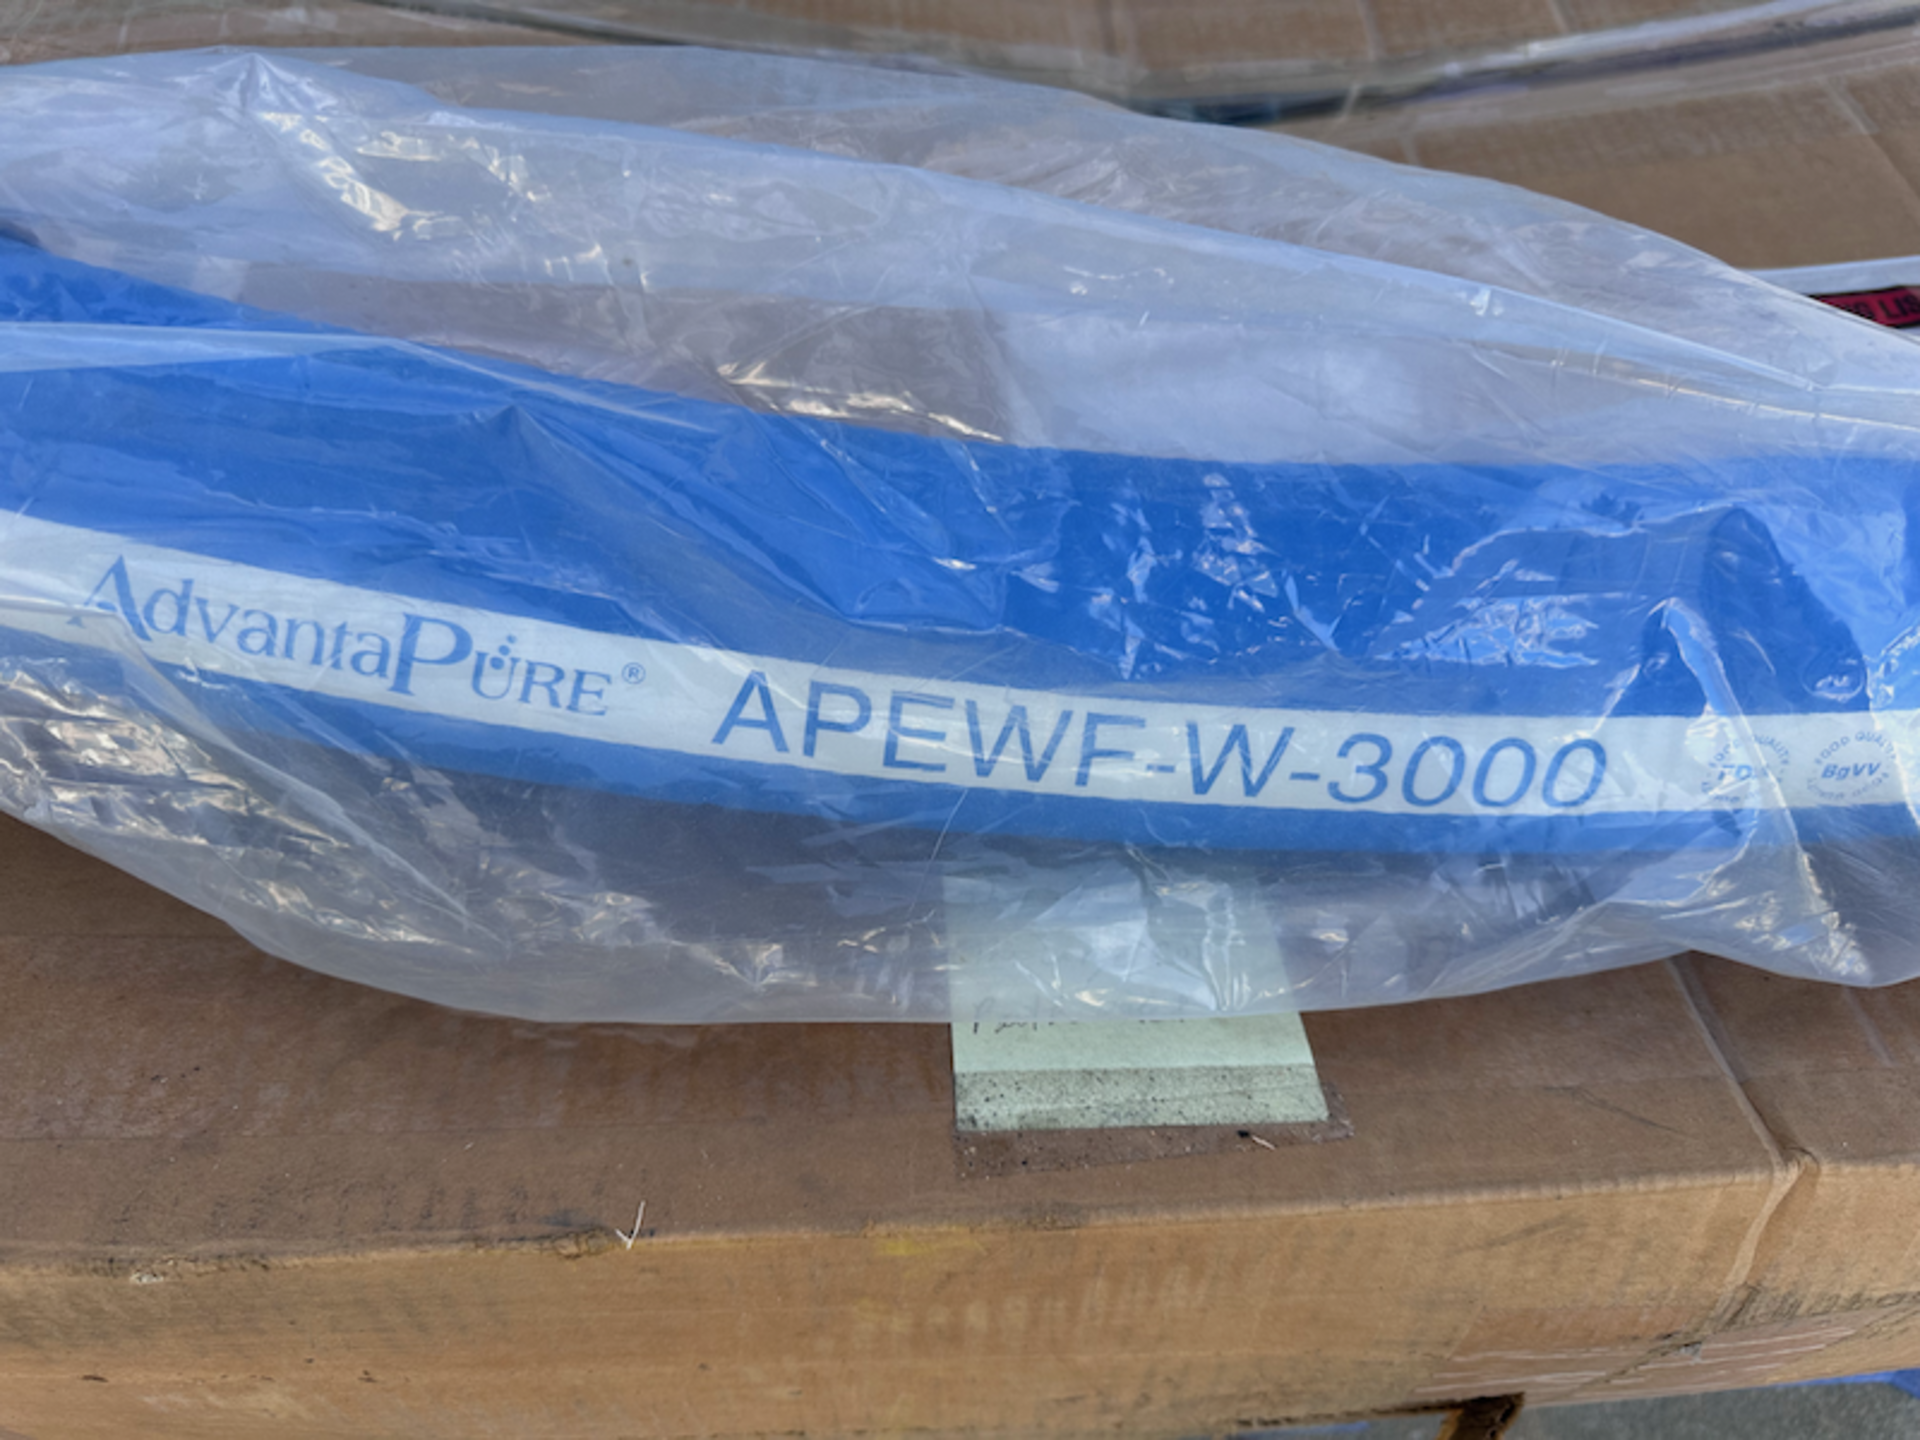 Various High Vacuum Tubes and Hoses. AdvantaPure APEWF-W-3000. ProcessHQ. Assets Located in Santa - Image 4 of 12